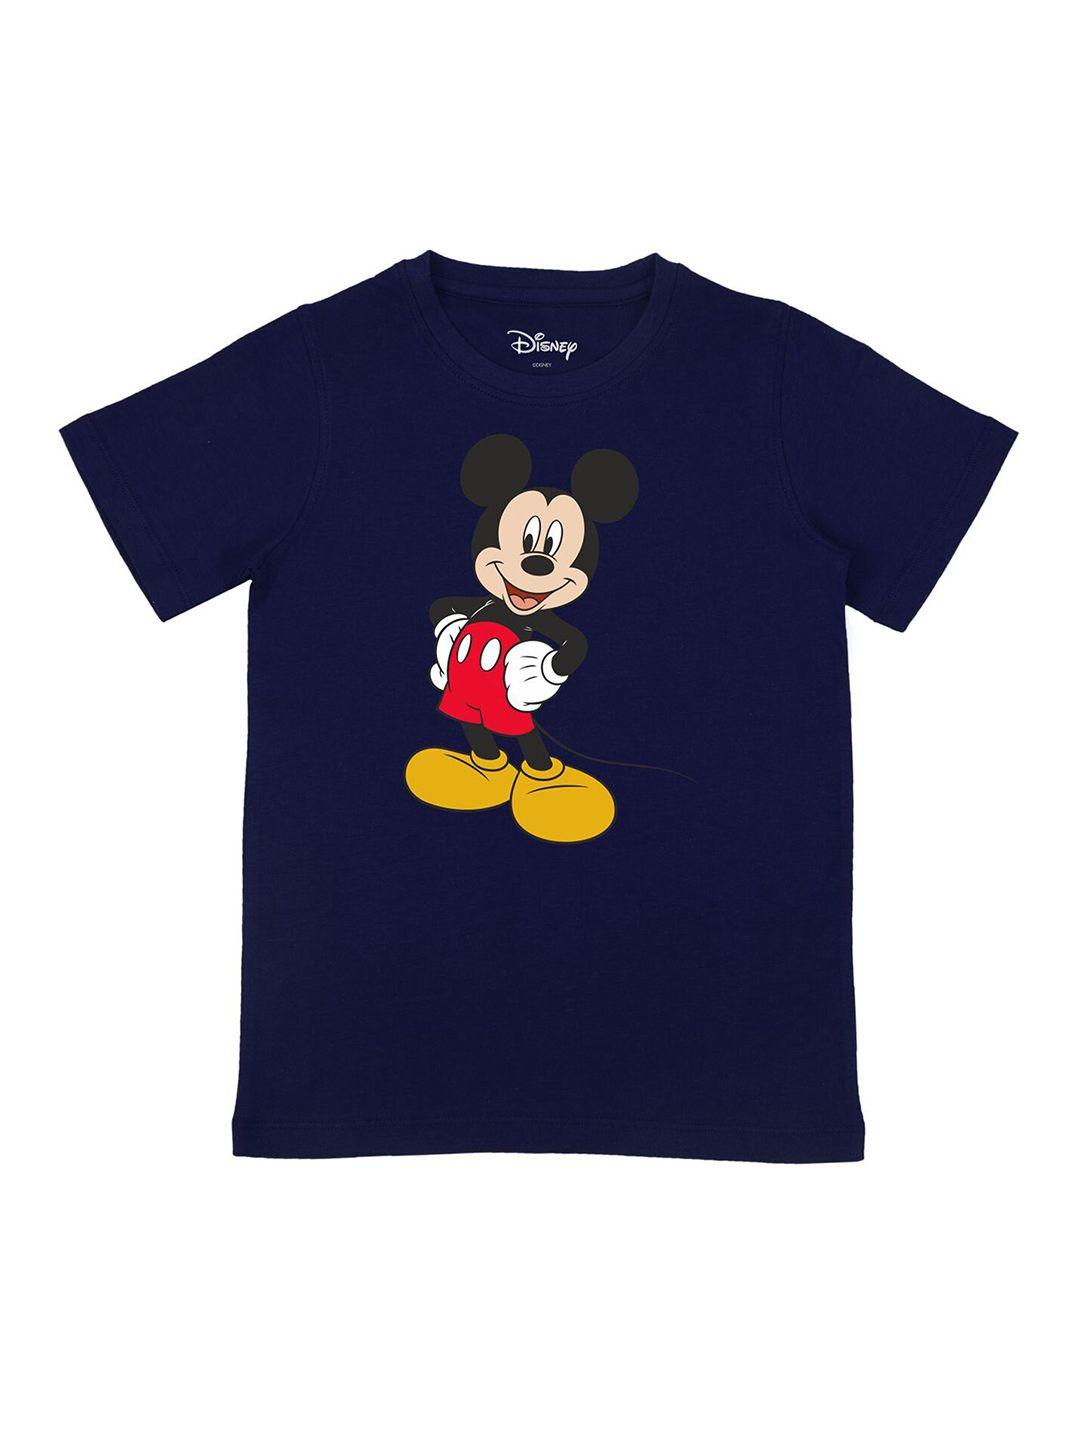 disney by wear your mind boys navy blue  black mickey mouse printed pure cotton t-shirt